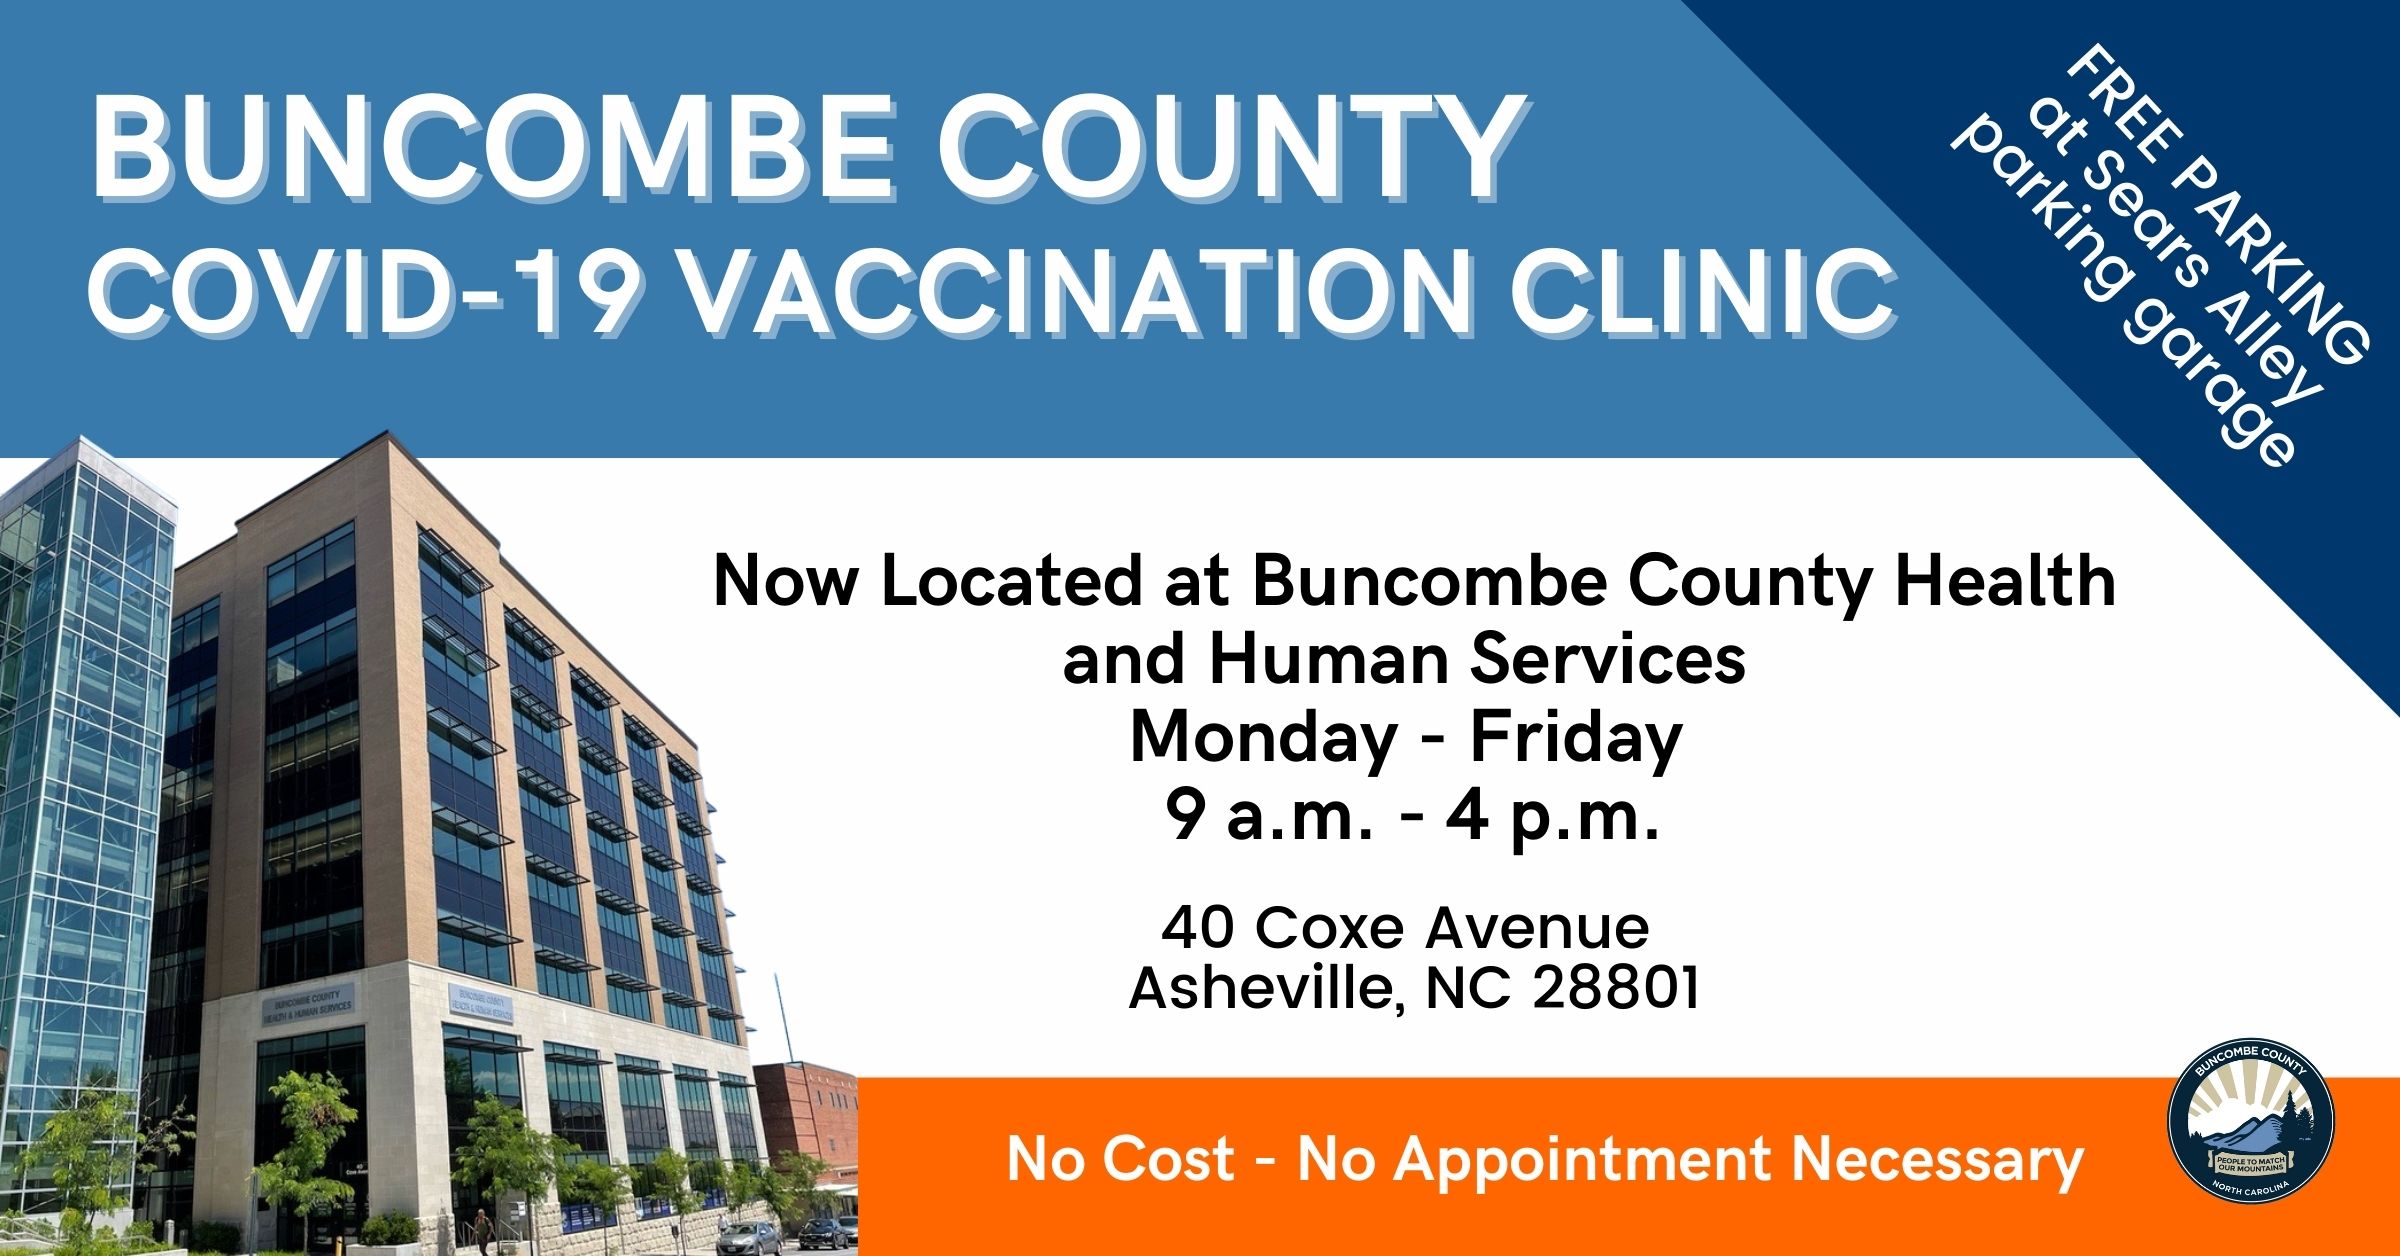 County Center - Buncombe County Covid-19 Vaccination Clinic Moves To 40 Coxe Avenue In Downtown Asheville